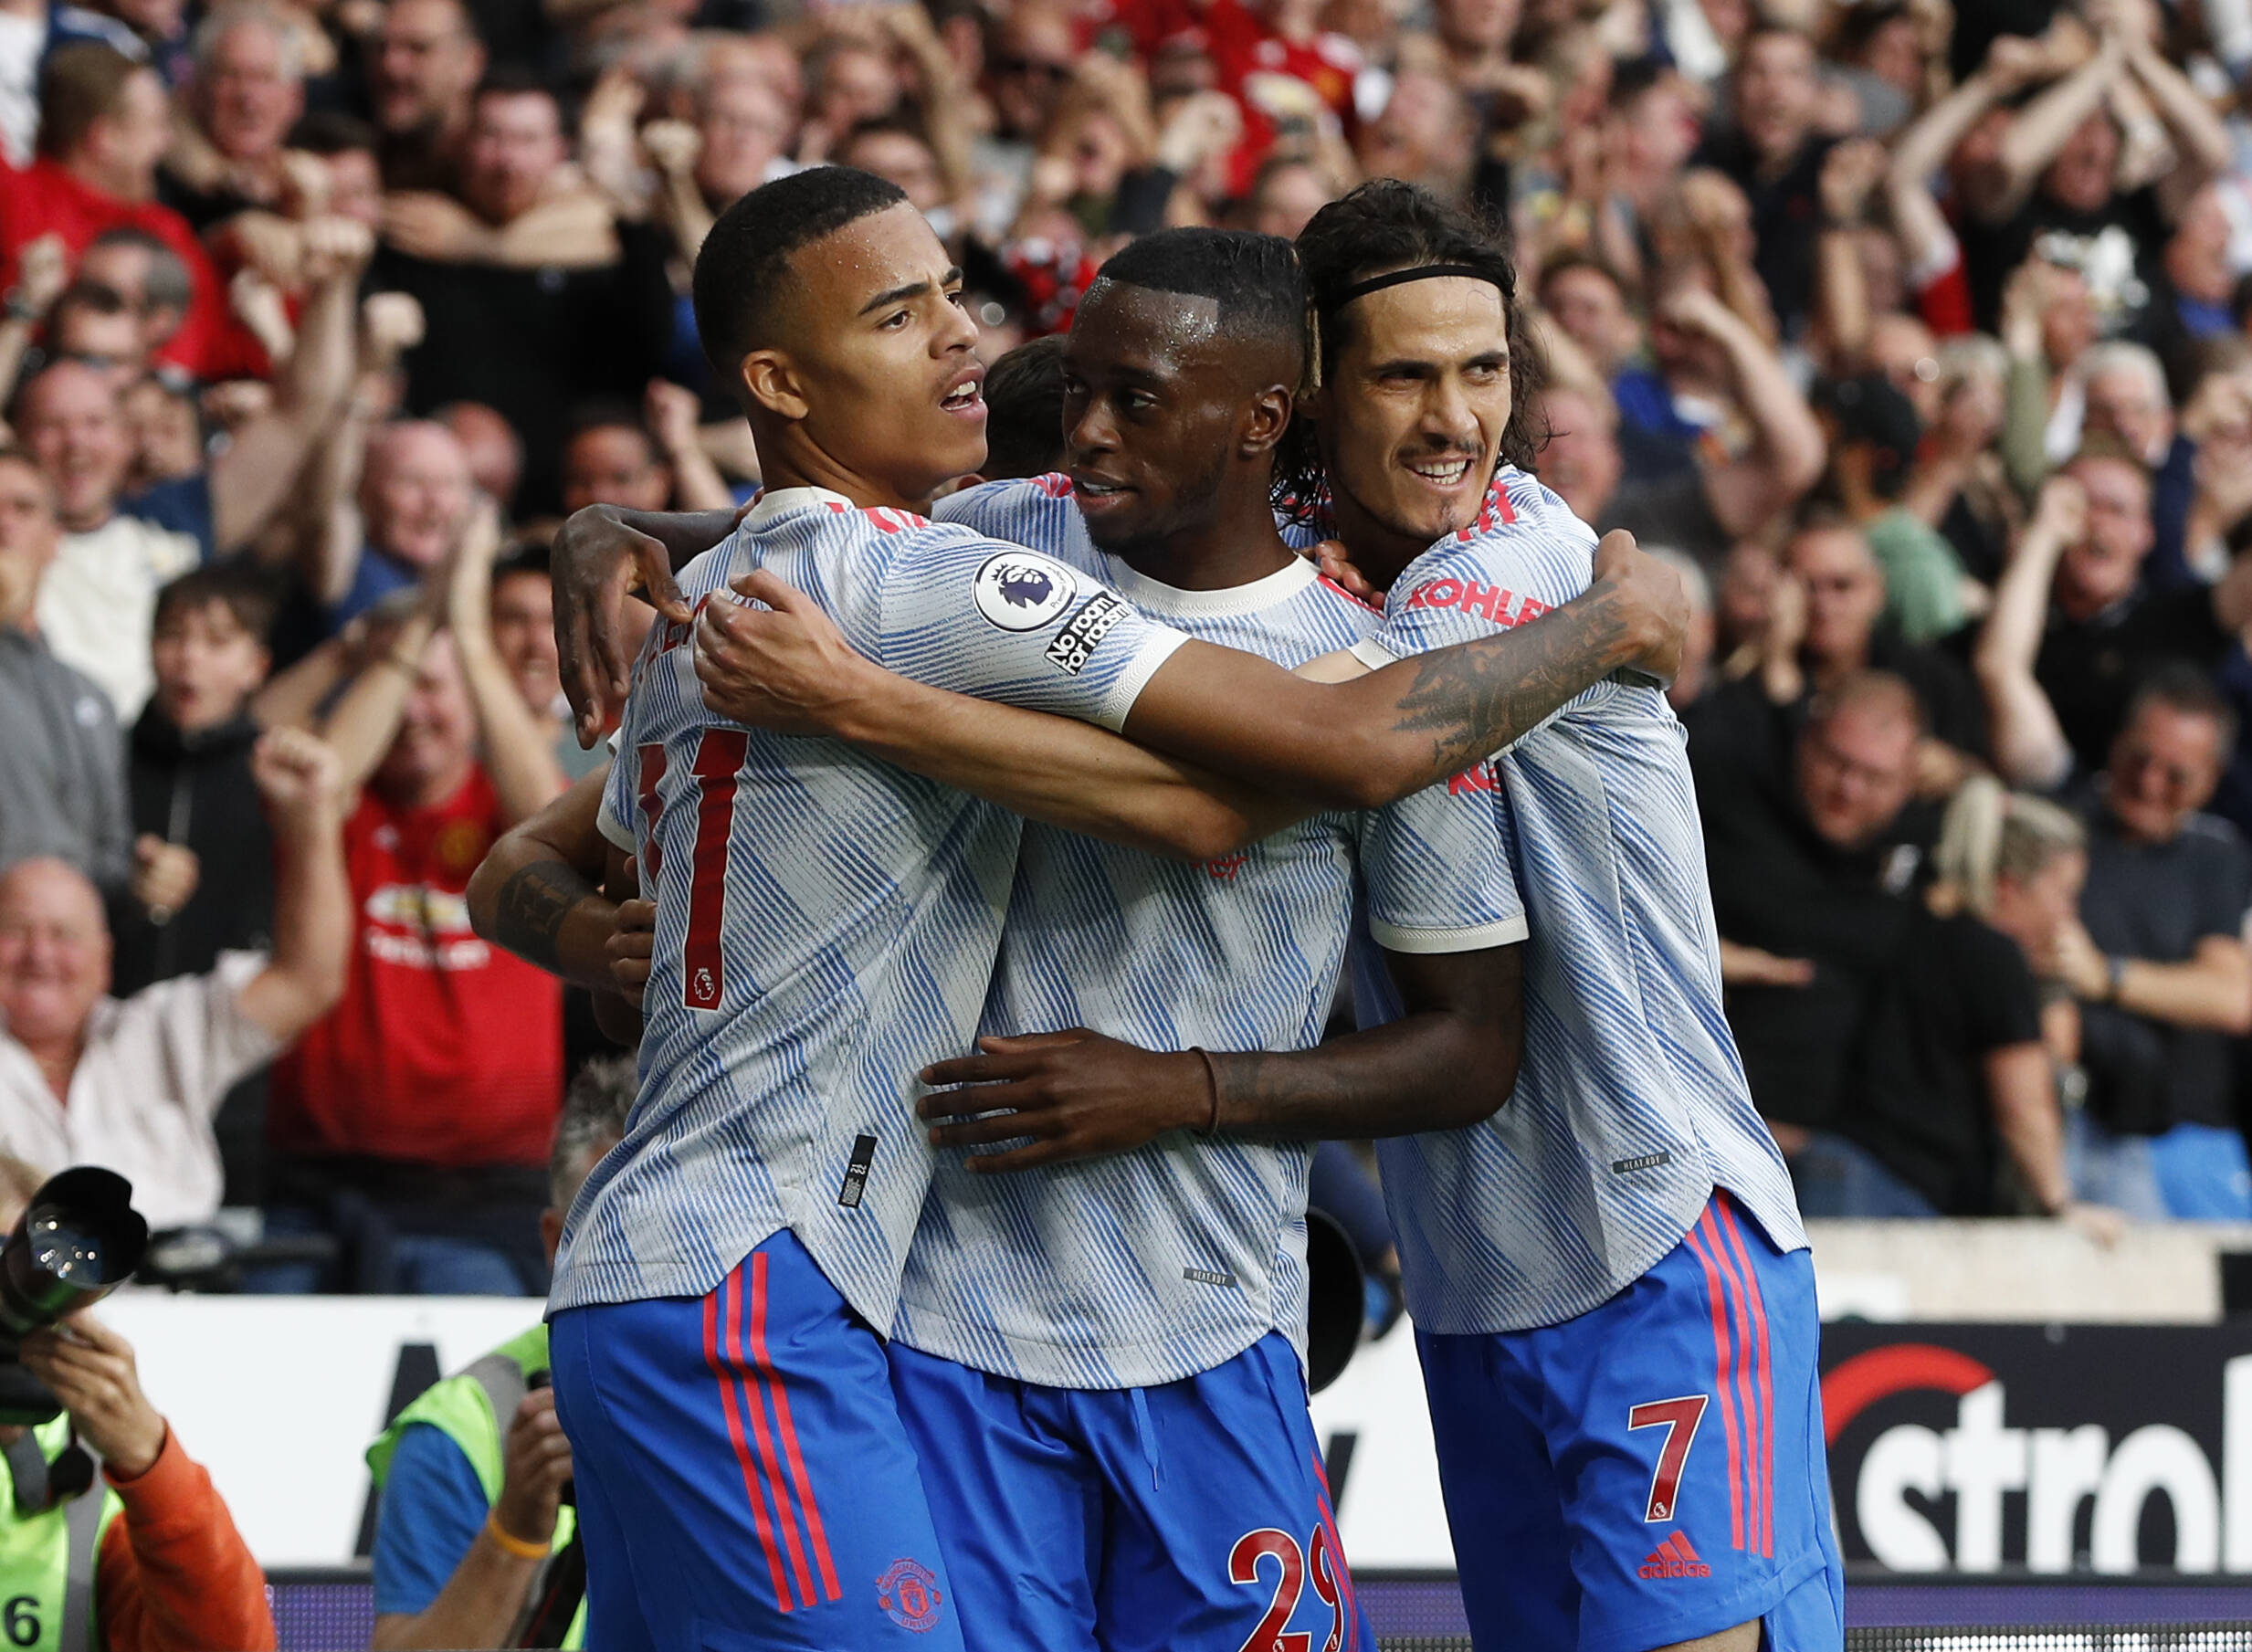 Manchester United players celebrate scoring a goal against Wolves.